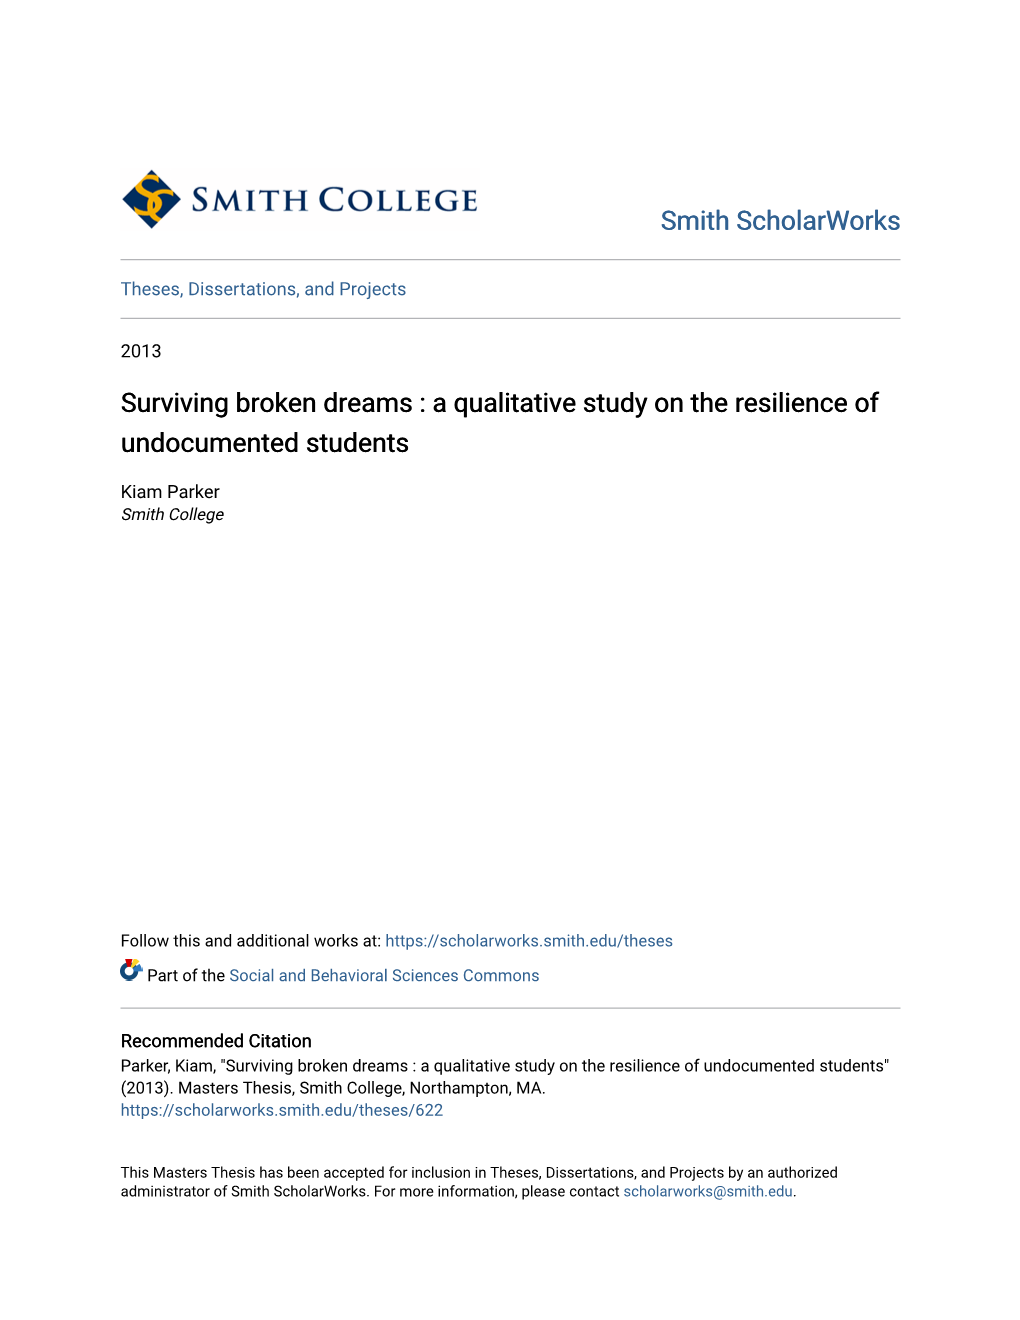 Surviving Broken Dreams : a Qualitative Study on the Resilience of Undocumented Students